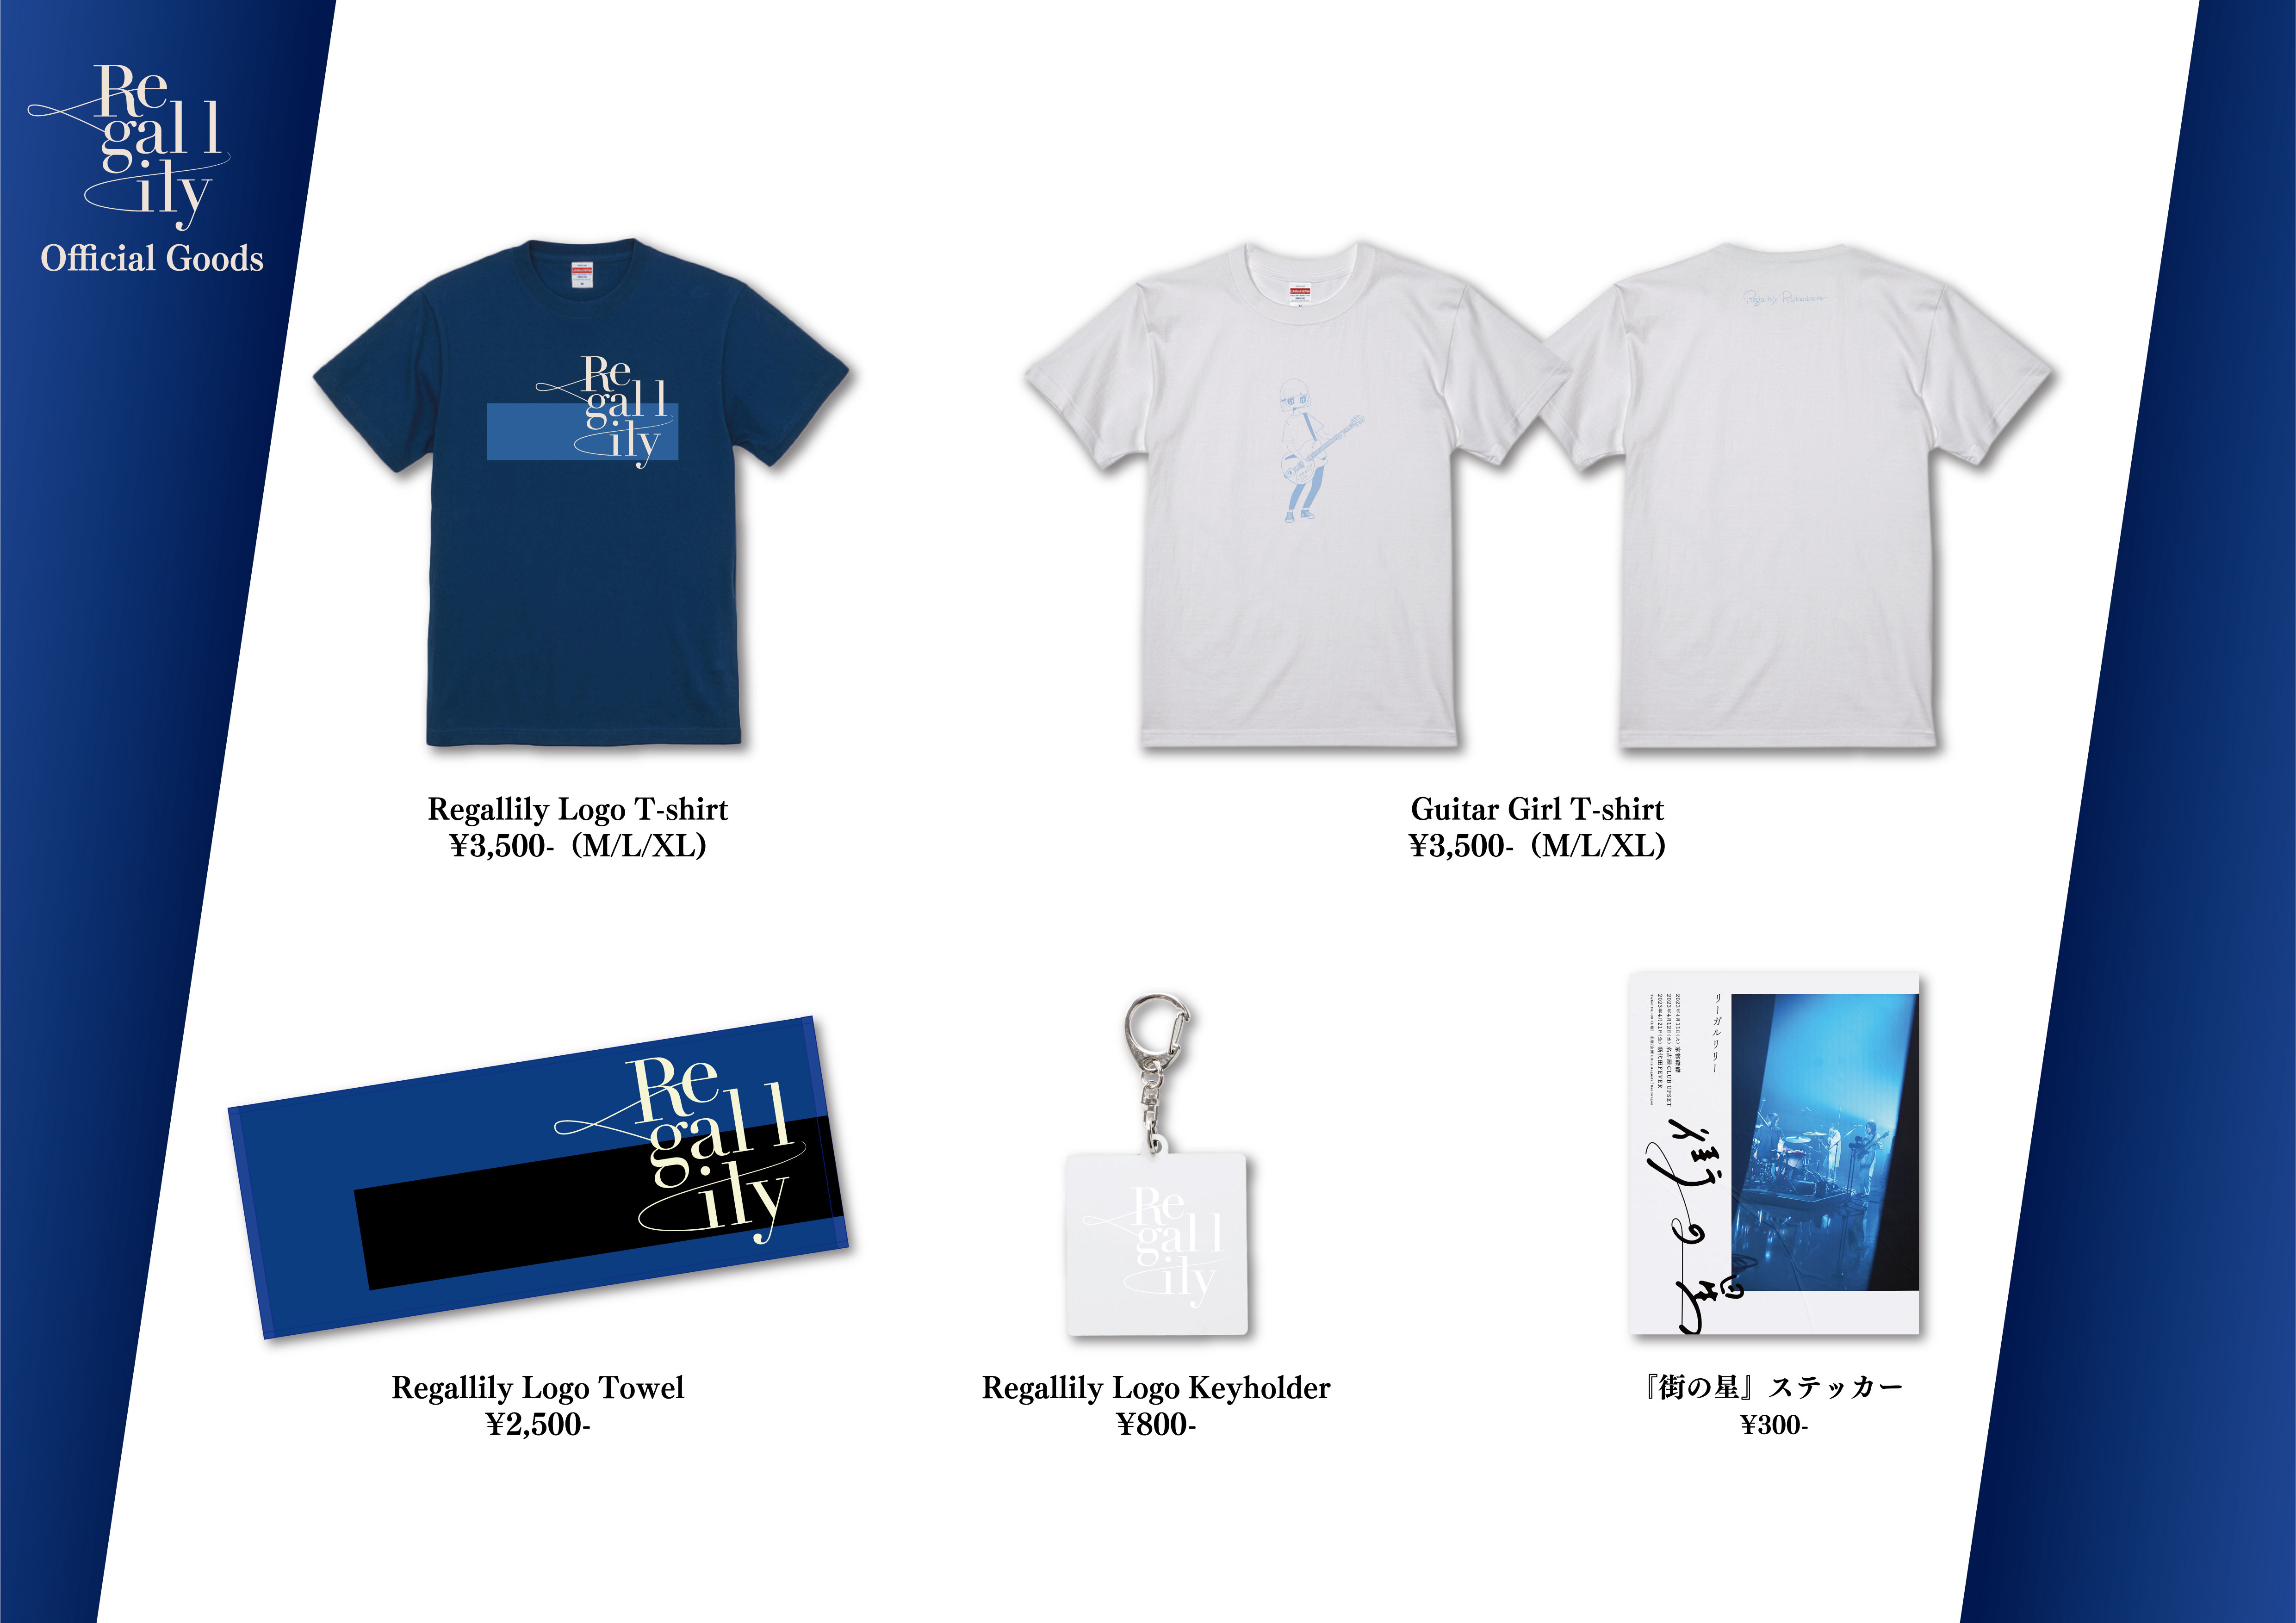 Regal Lily "Star of the City" New Merchandise